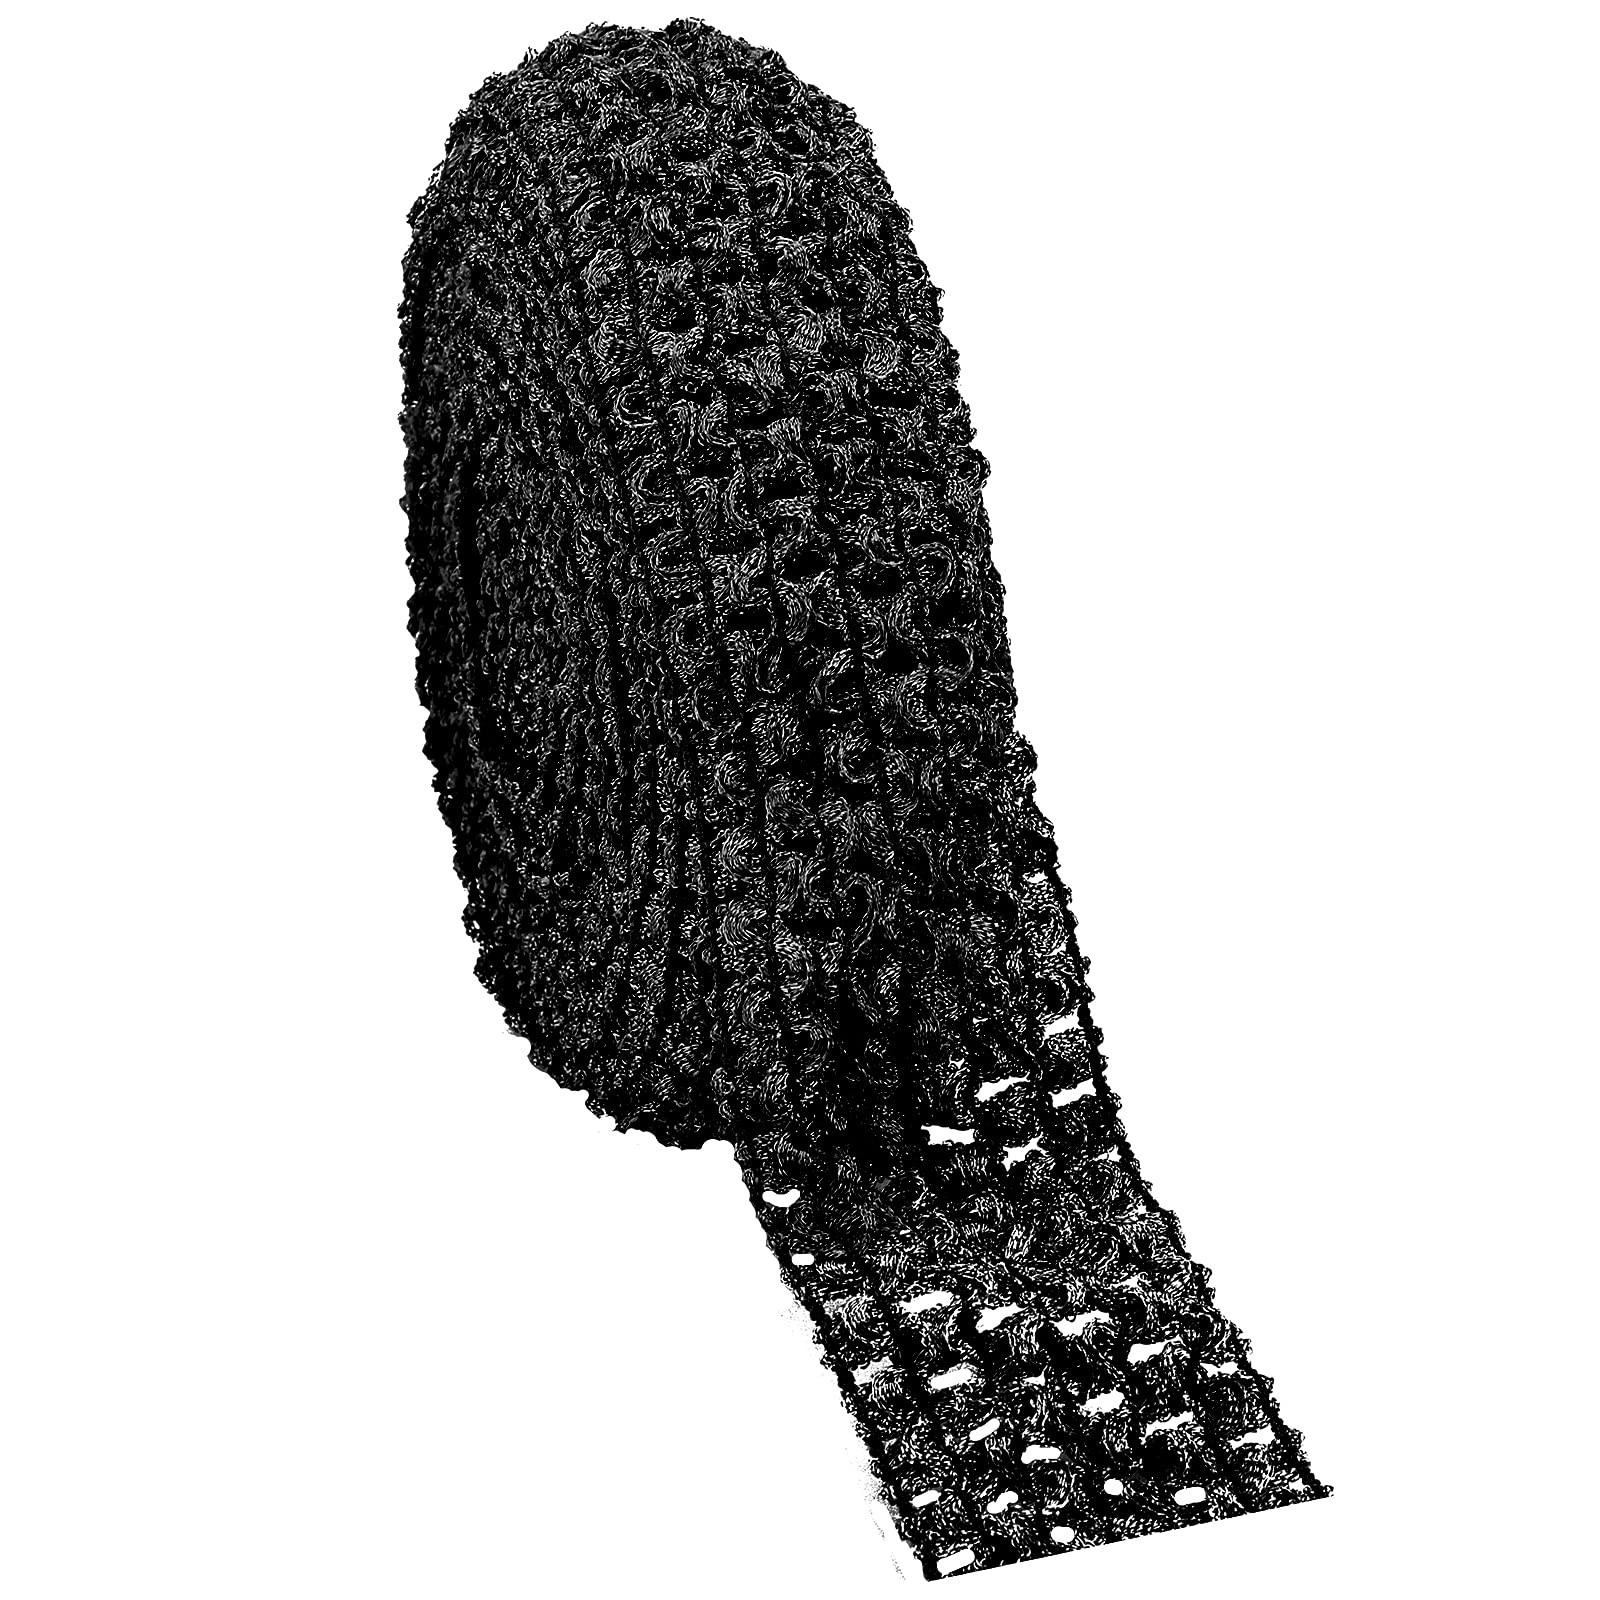 Crochet Headband: These stylish headbands are an ideal hair accessory for women, teens, and girls with short, curly, straight, or long hair; the colorful headbands feature a cool design that will instantly elevate your hairstyle For Any Occasion: Our cute headbands are perfect for casual everyday wear, to dress up a formal outfit for an upcoming celebration, or a night out on the town with friends; suitable for bad hair days, while exercising or just lounging around the house 24 Colors: This pack includes 24 colored elastic headbands in gray, blue, black, purple, burgundy, navy blue, white, yellow, pink, and more Reliable Quality: The elastic wide headbands are made from an elastic material that is breathable, stretchable, soft, and comfortable to wear for long periods of time What